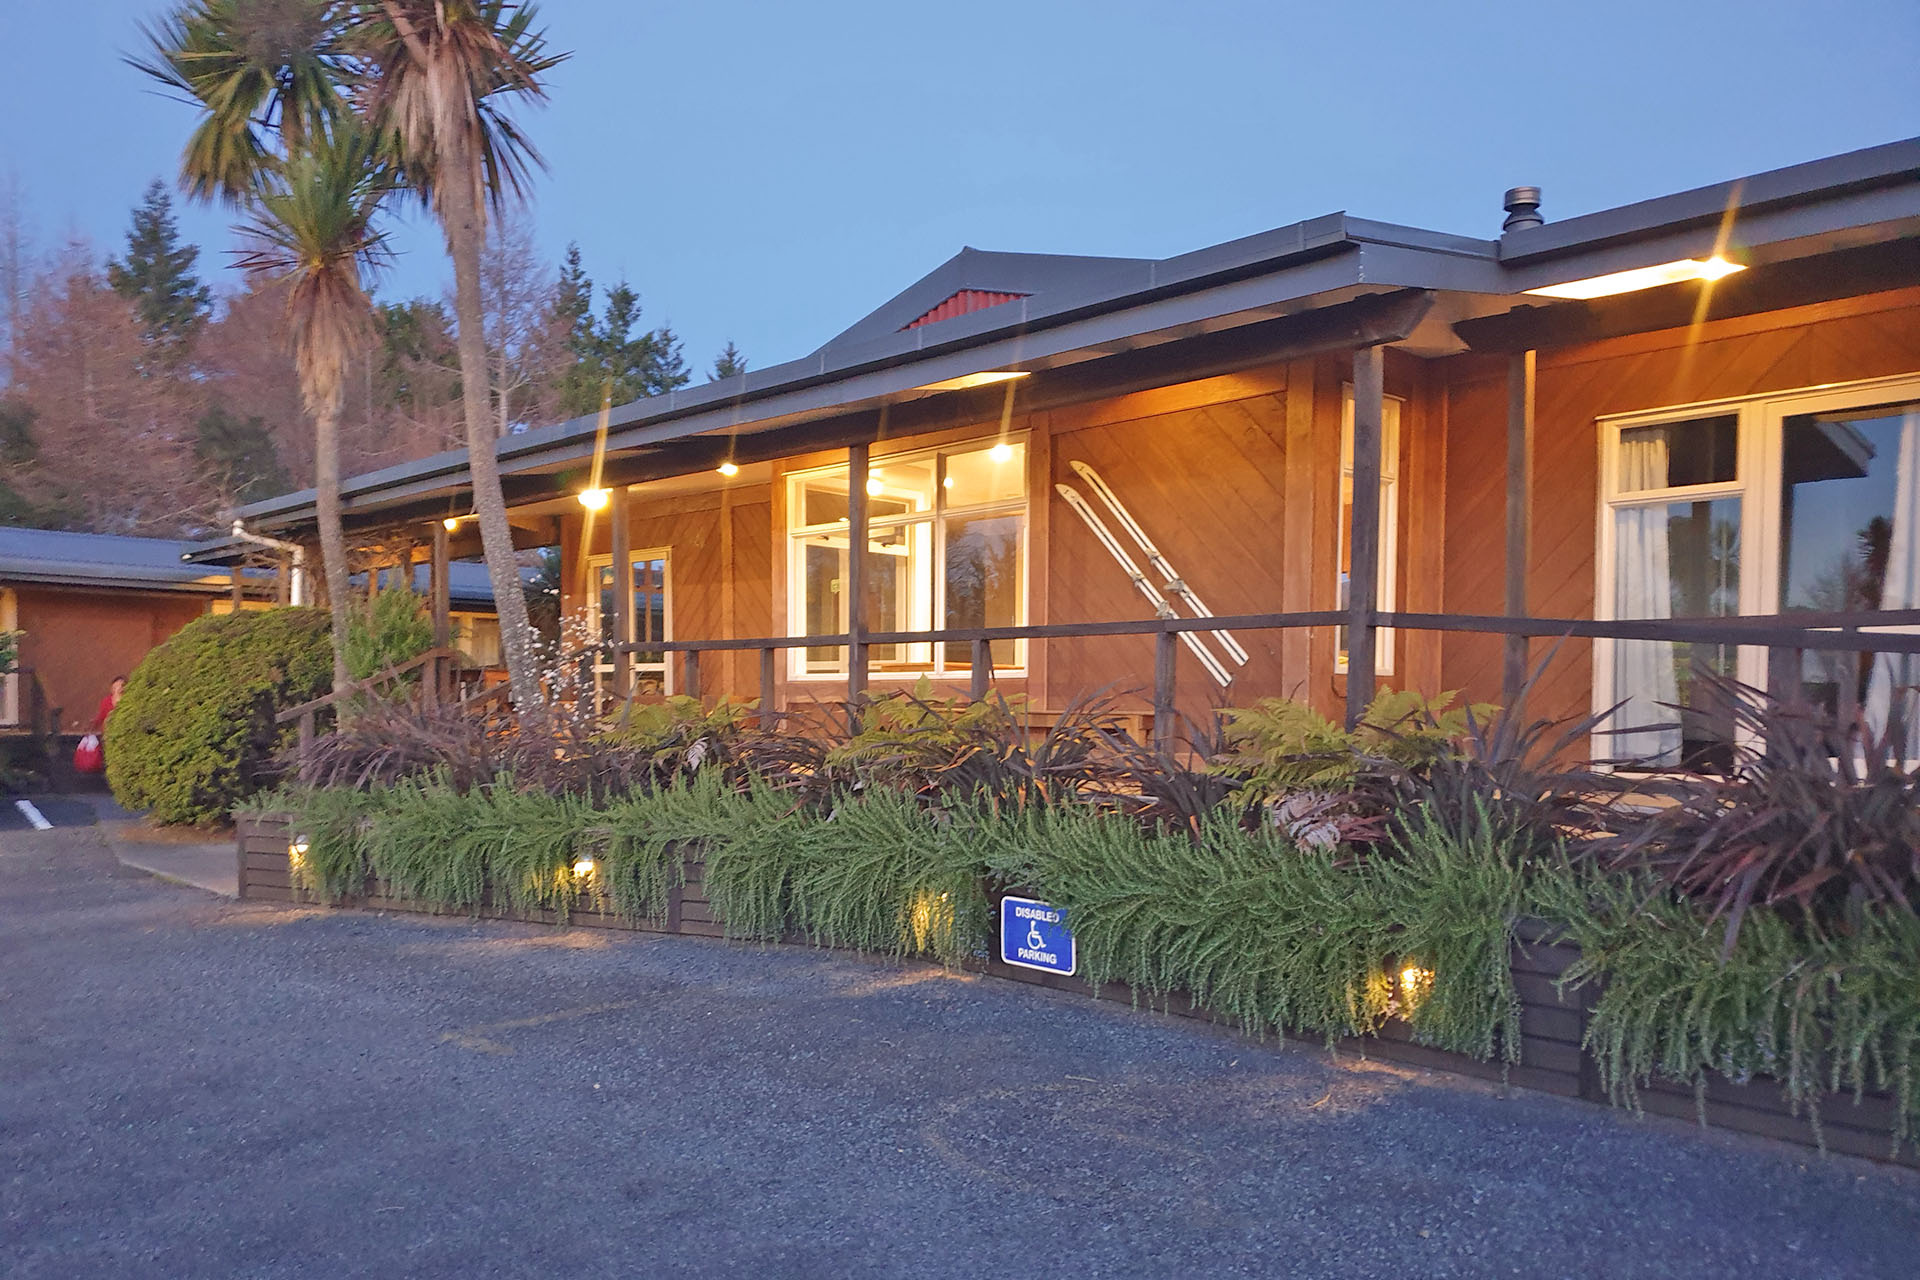 Plateau Lodge, accommodation in the Tongariro National Park